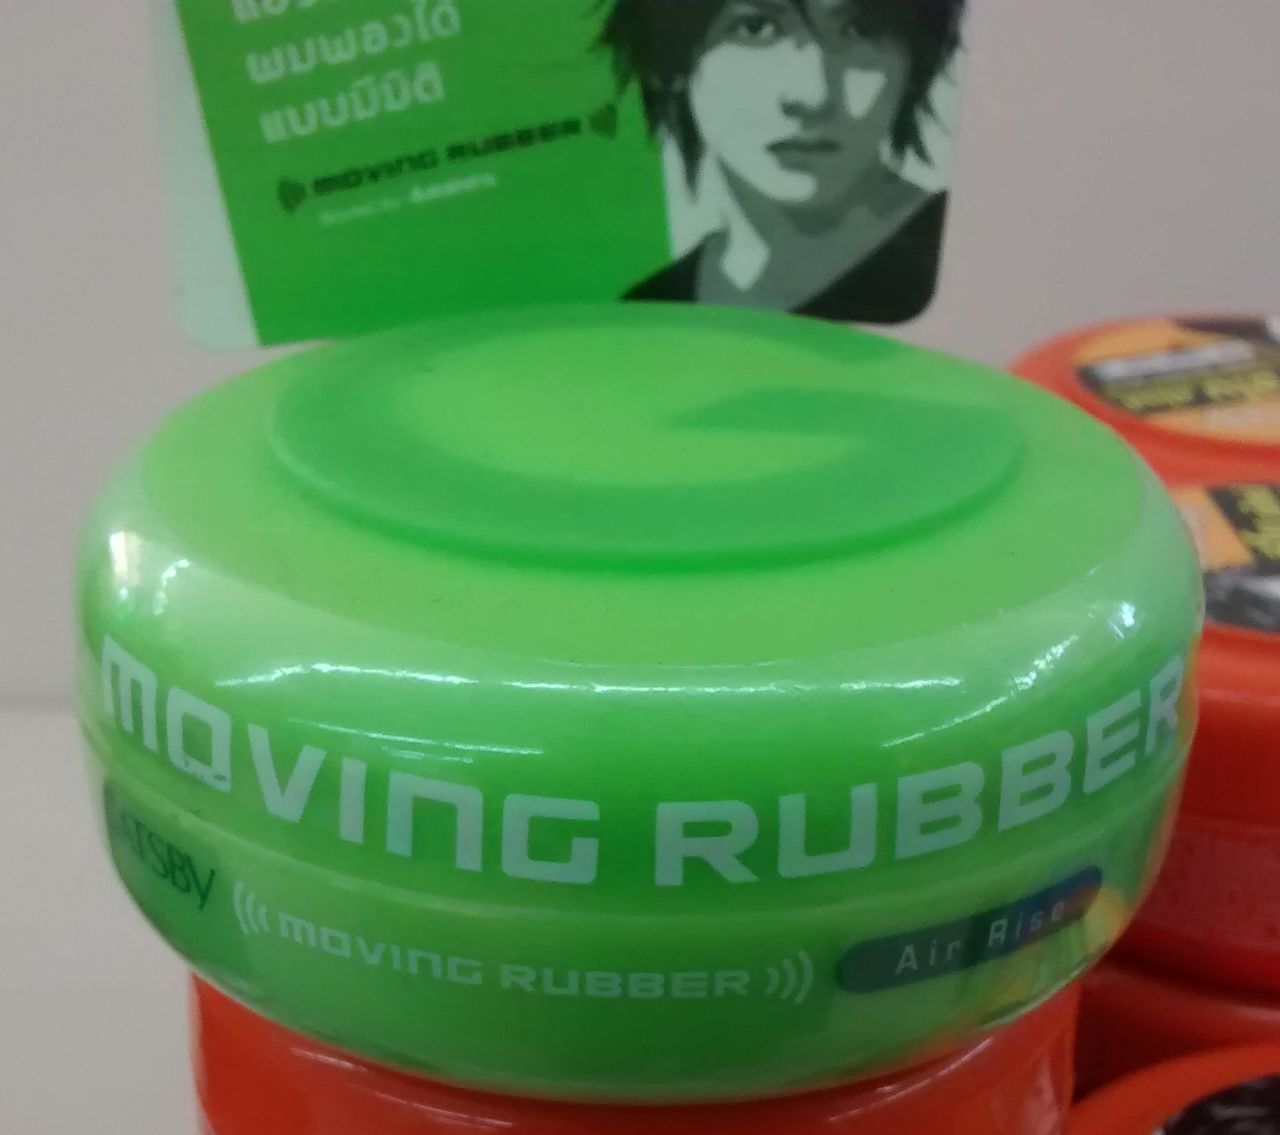 Moving Rubber